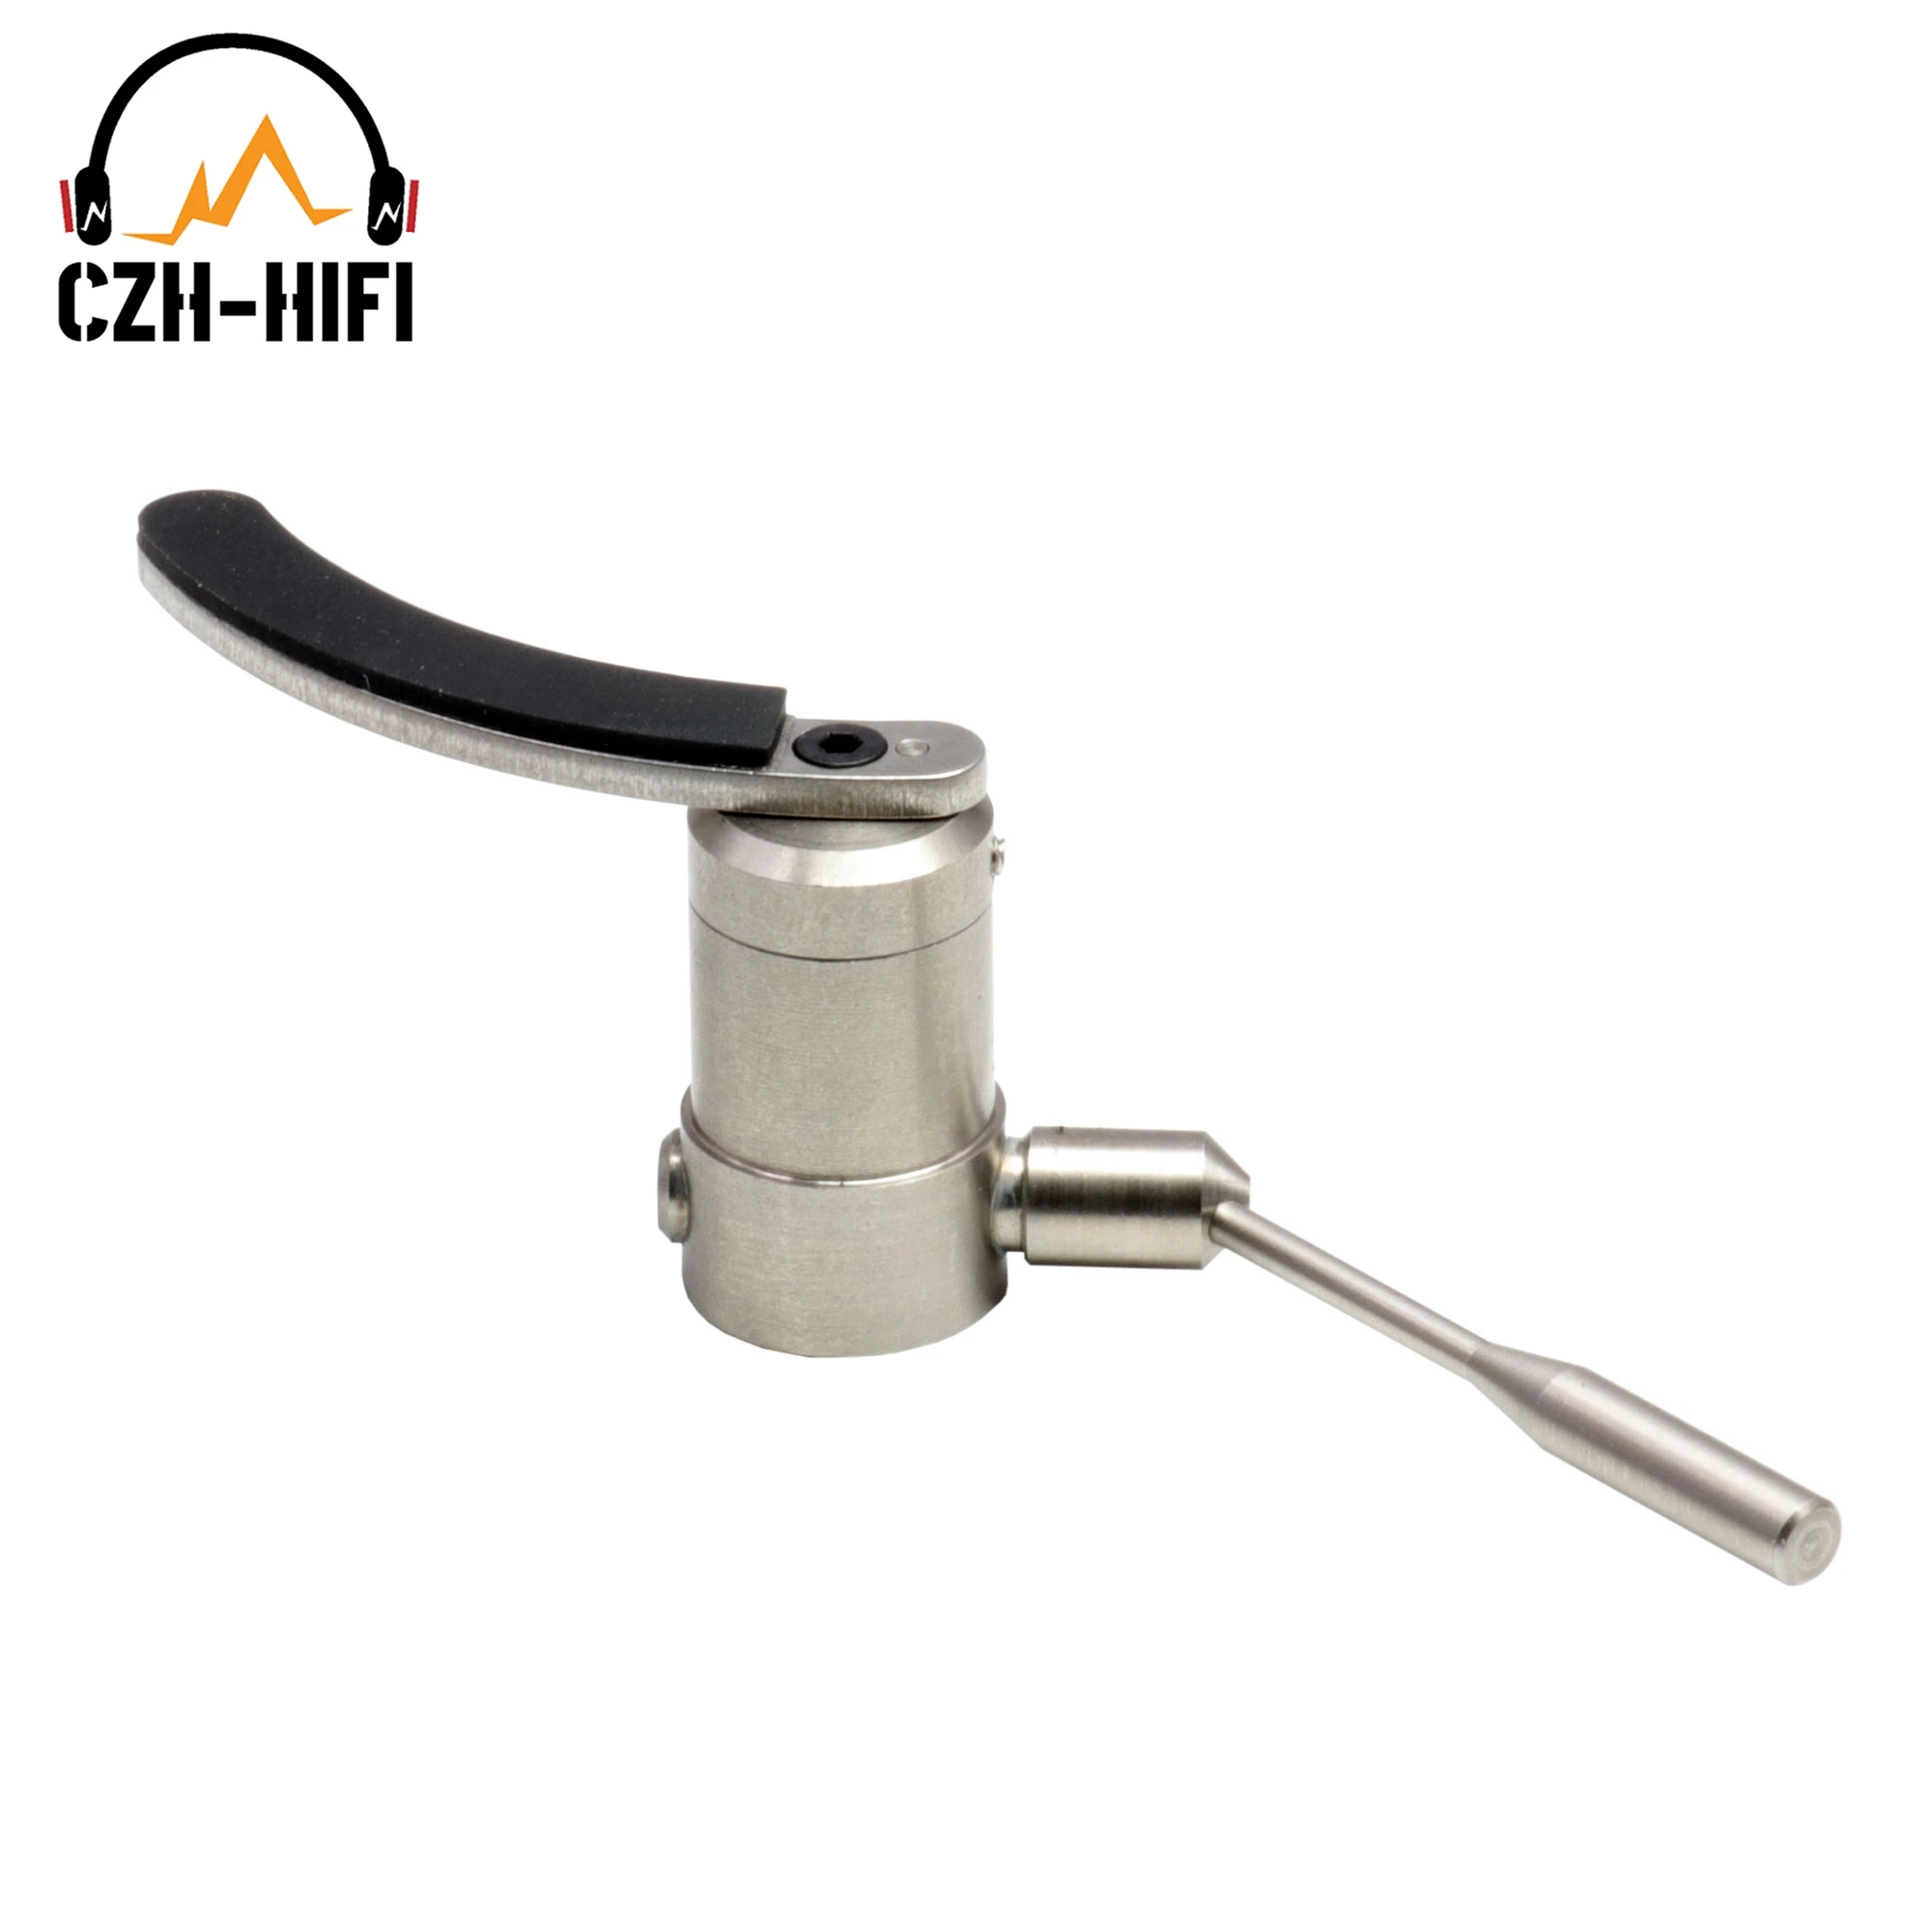 1PC Brand New EIZZ High End Tonearm Arm Lifter for LP Turntable Recorder Player DISC Vinyl Phono HiFi Audio DIY enlarge